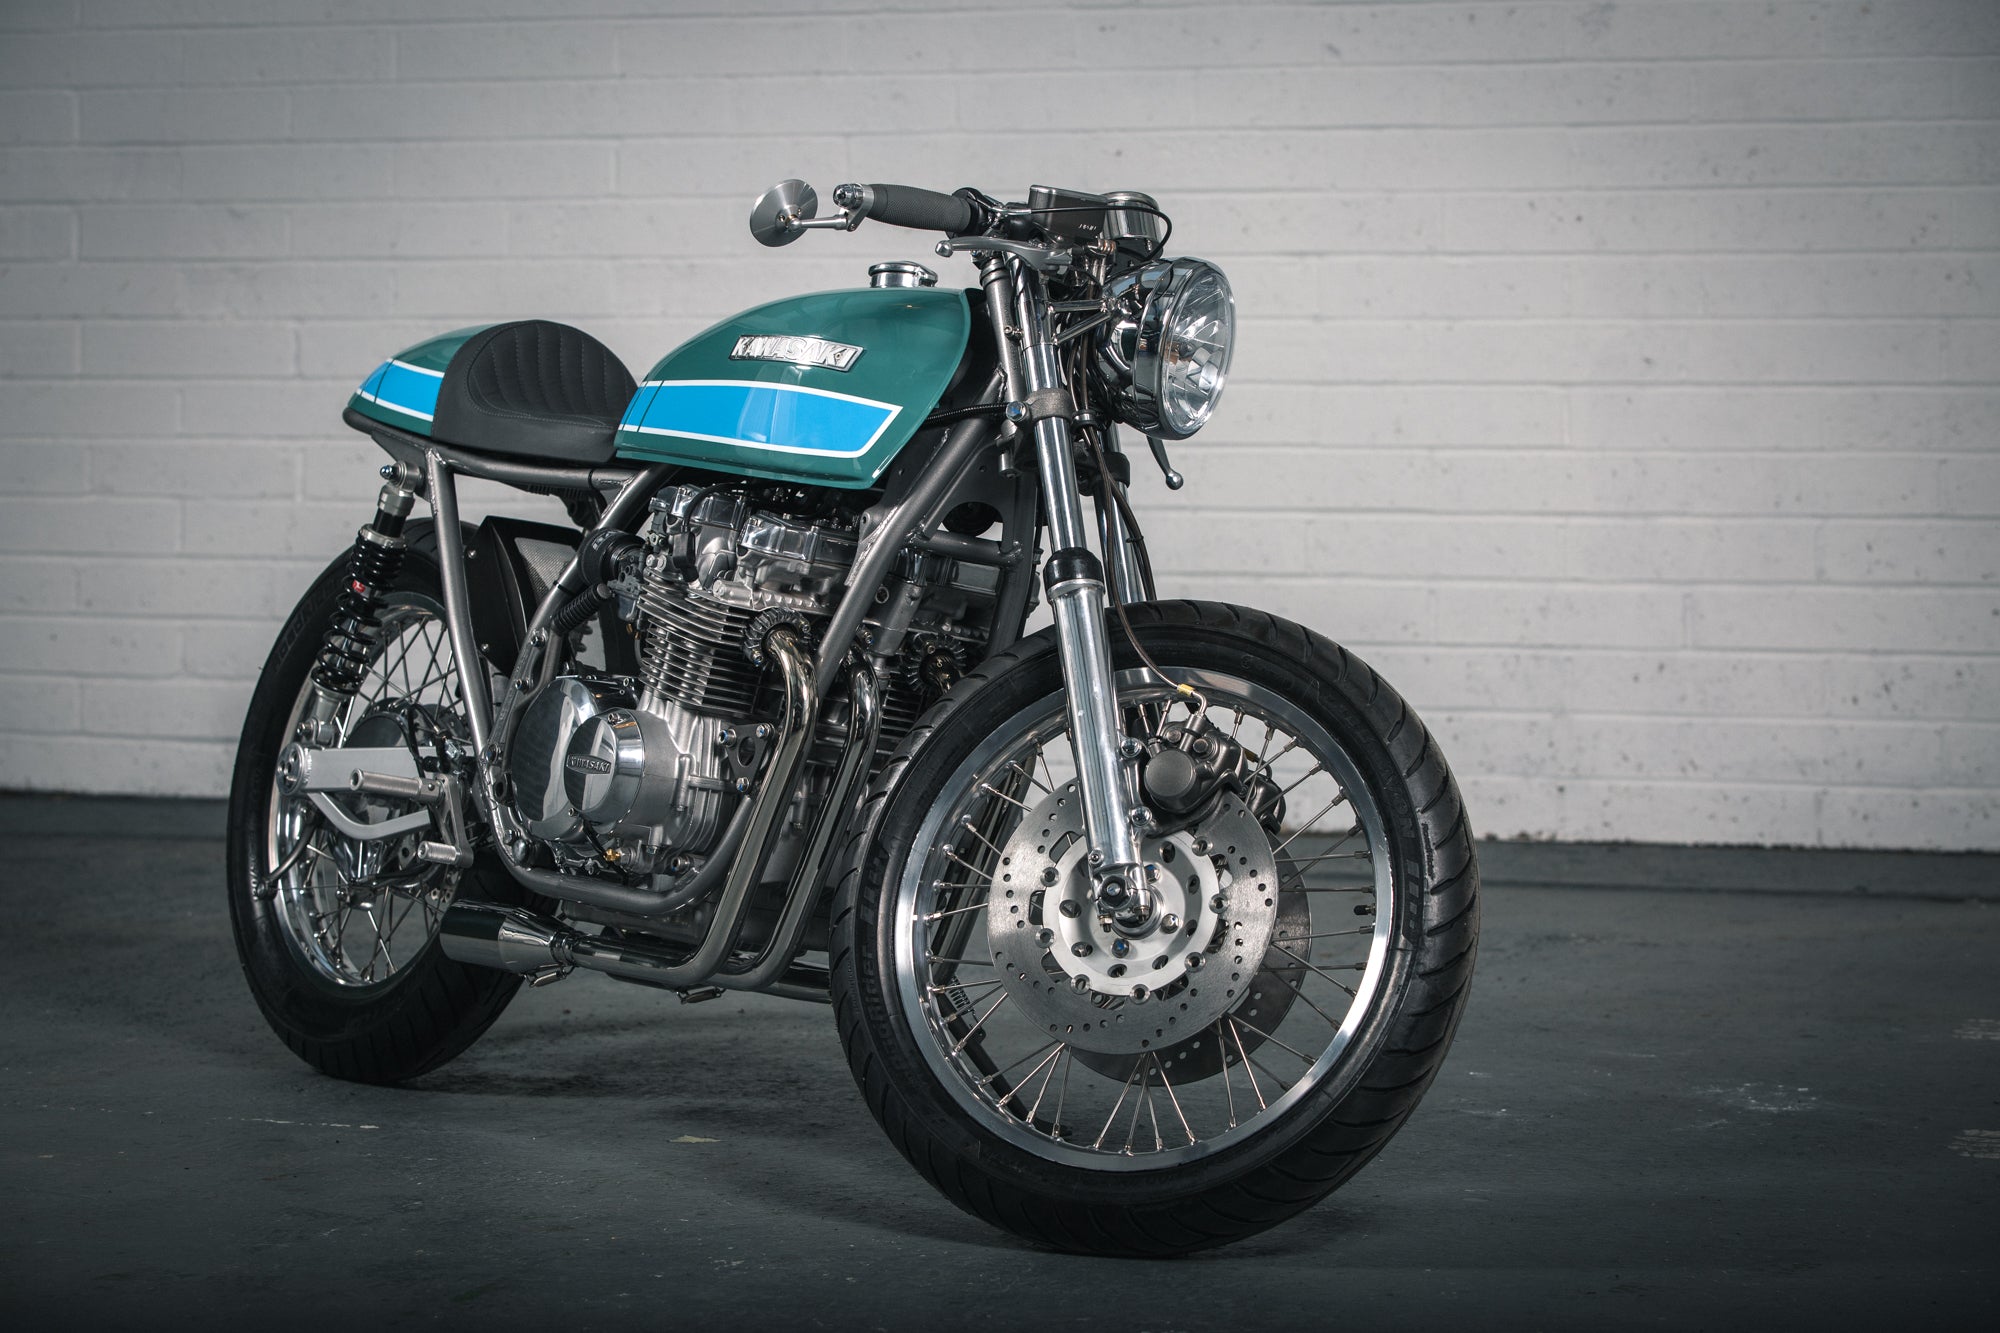 Z650 by Foundry Motorcycle